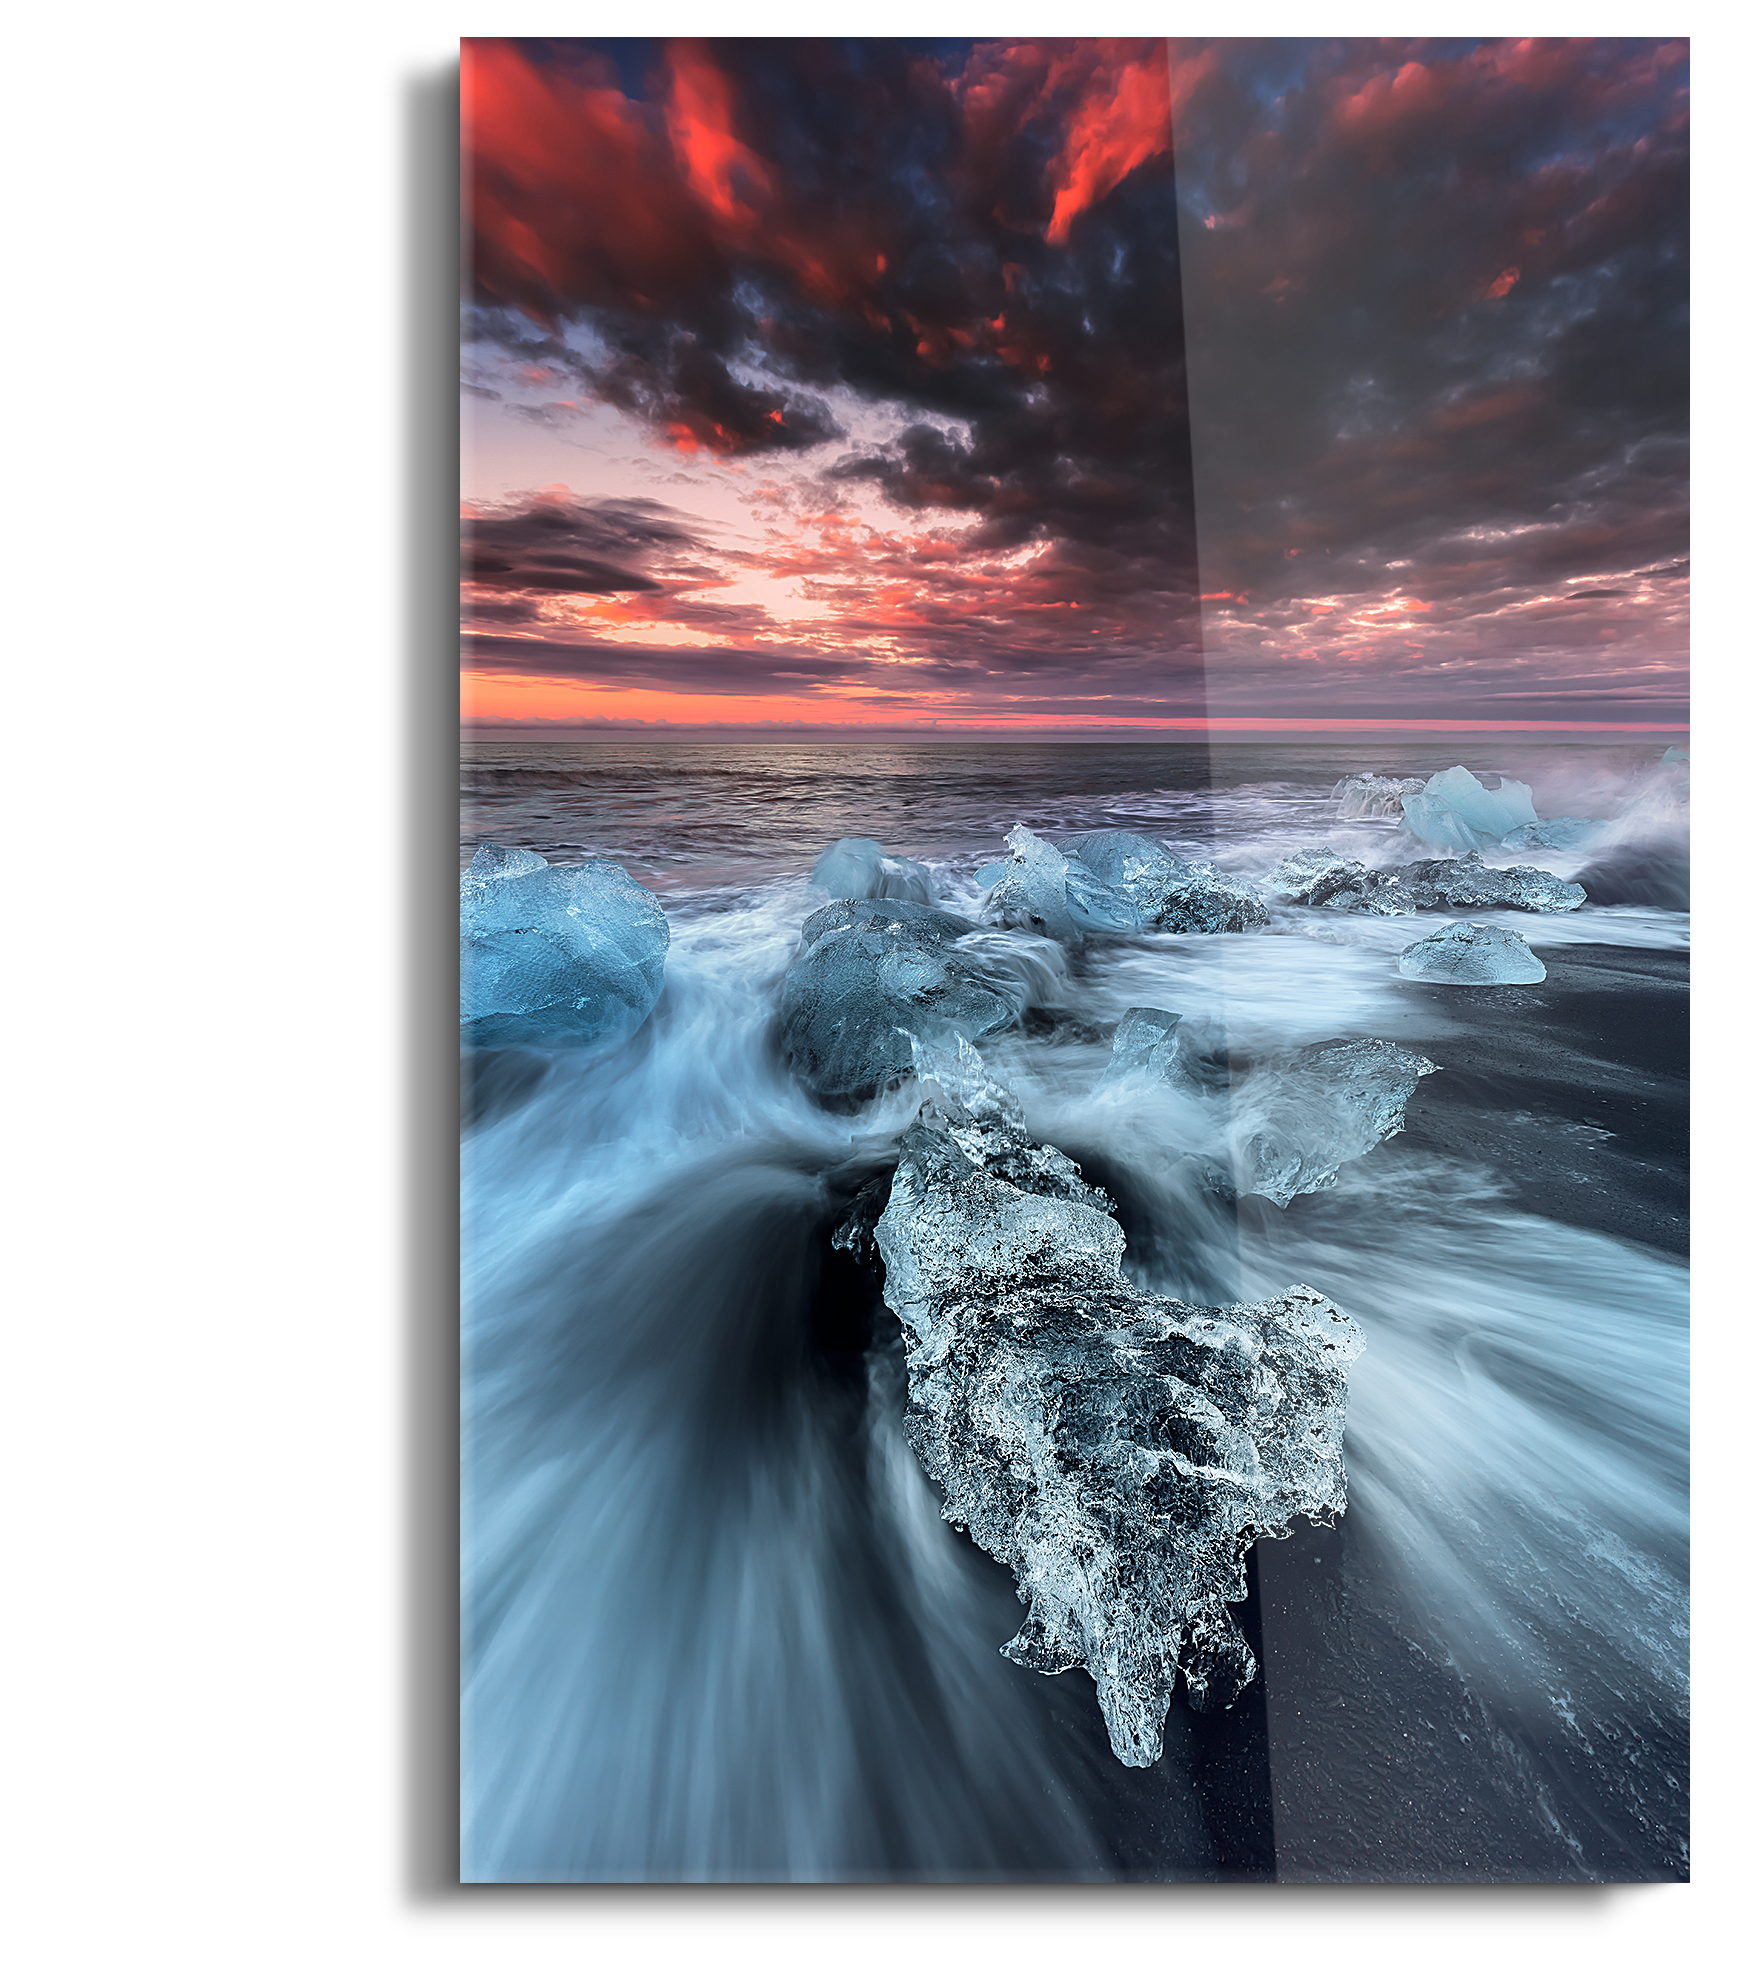 A picture of icy Iceland printed on a photo under acrylic glass representing blue water and red sky